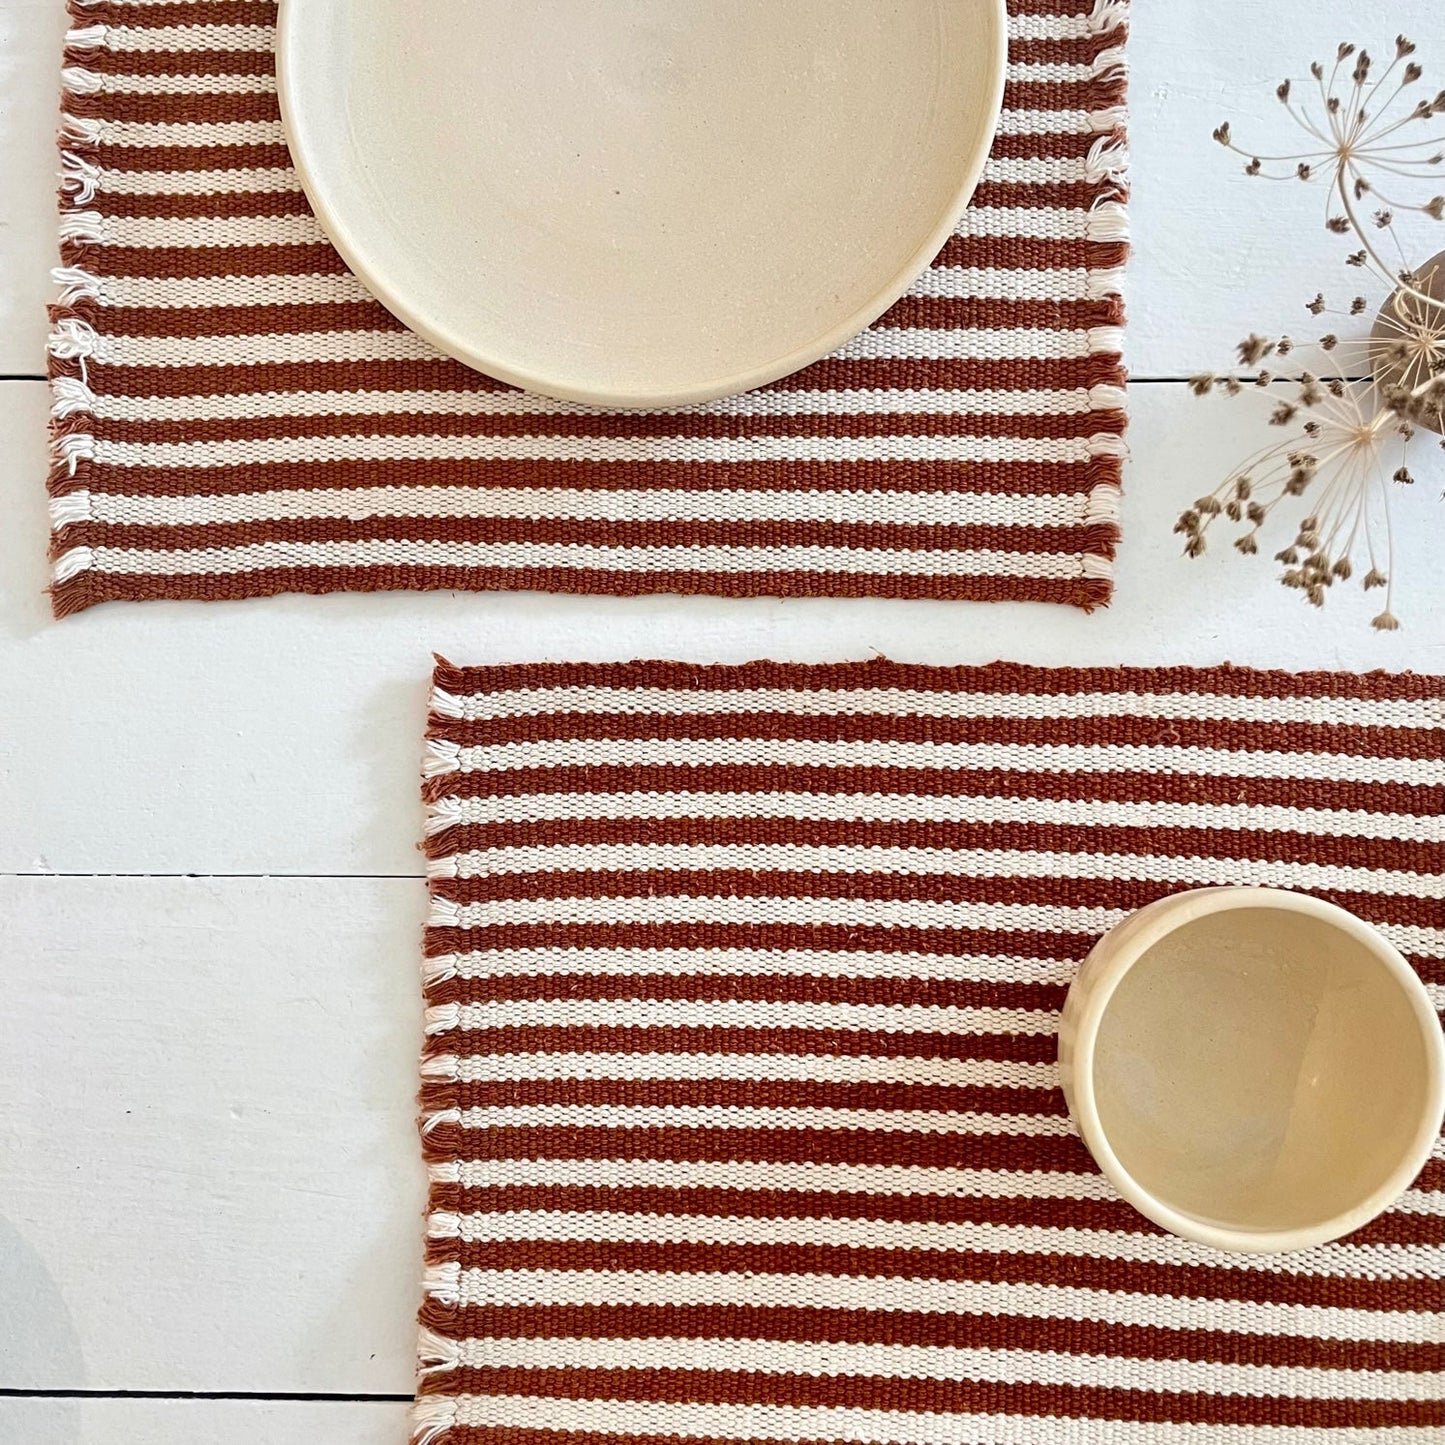 Summer placemats - Terra-cotta Stripes - Behind the Hill